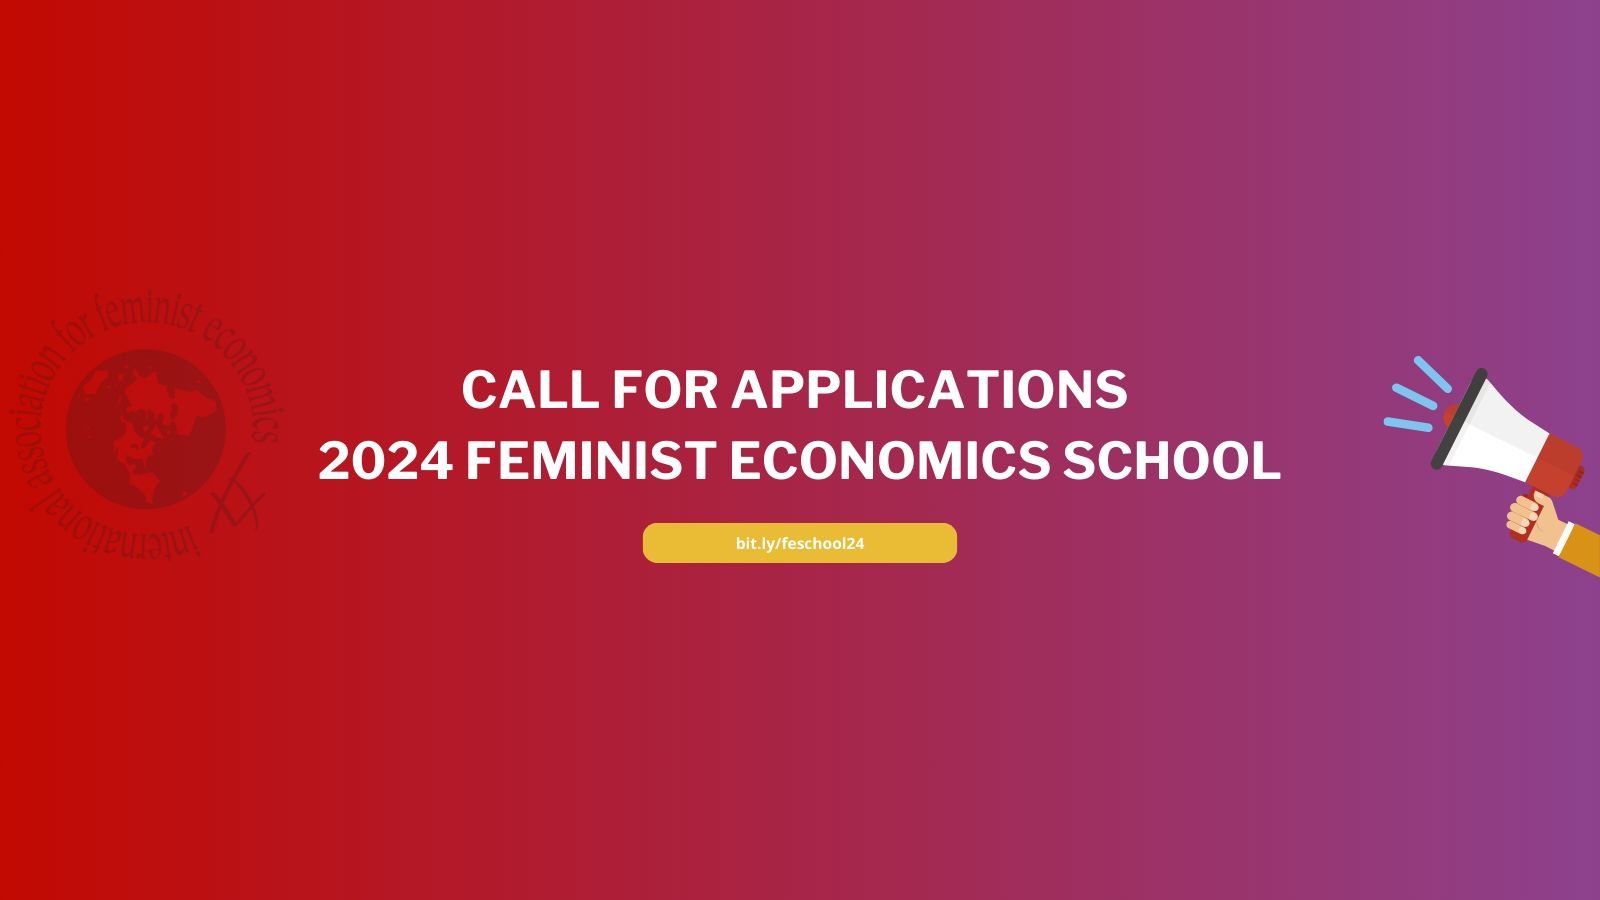 IAFFE’s 2nd Feminist Economics School 2024 for early career professionals.